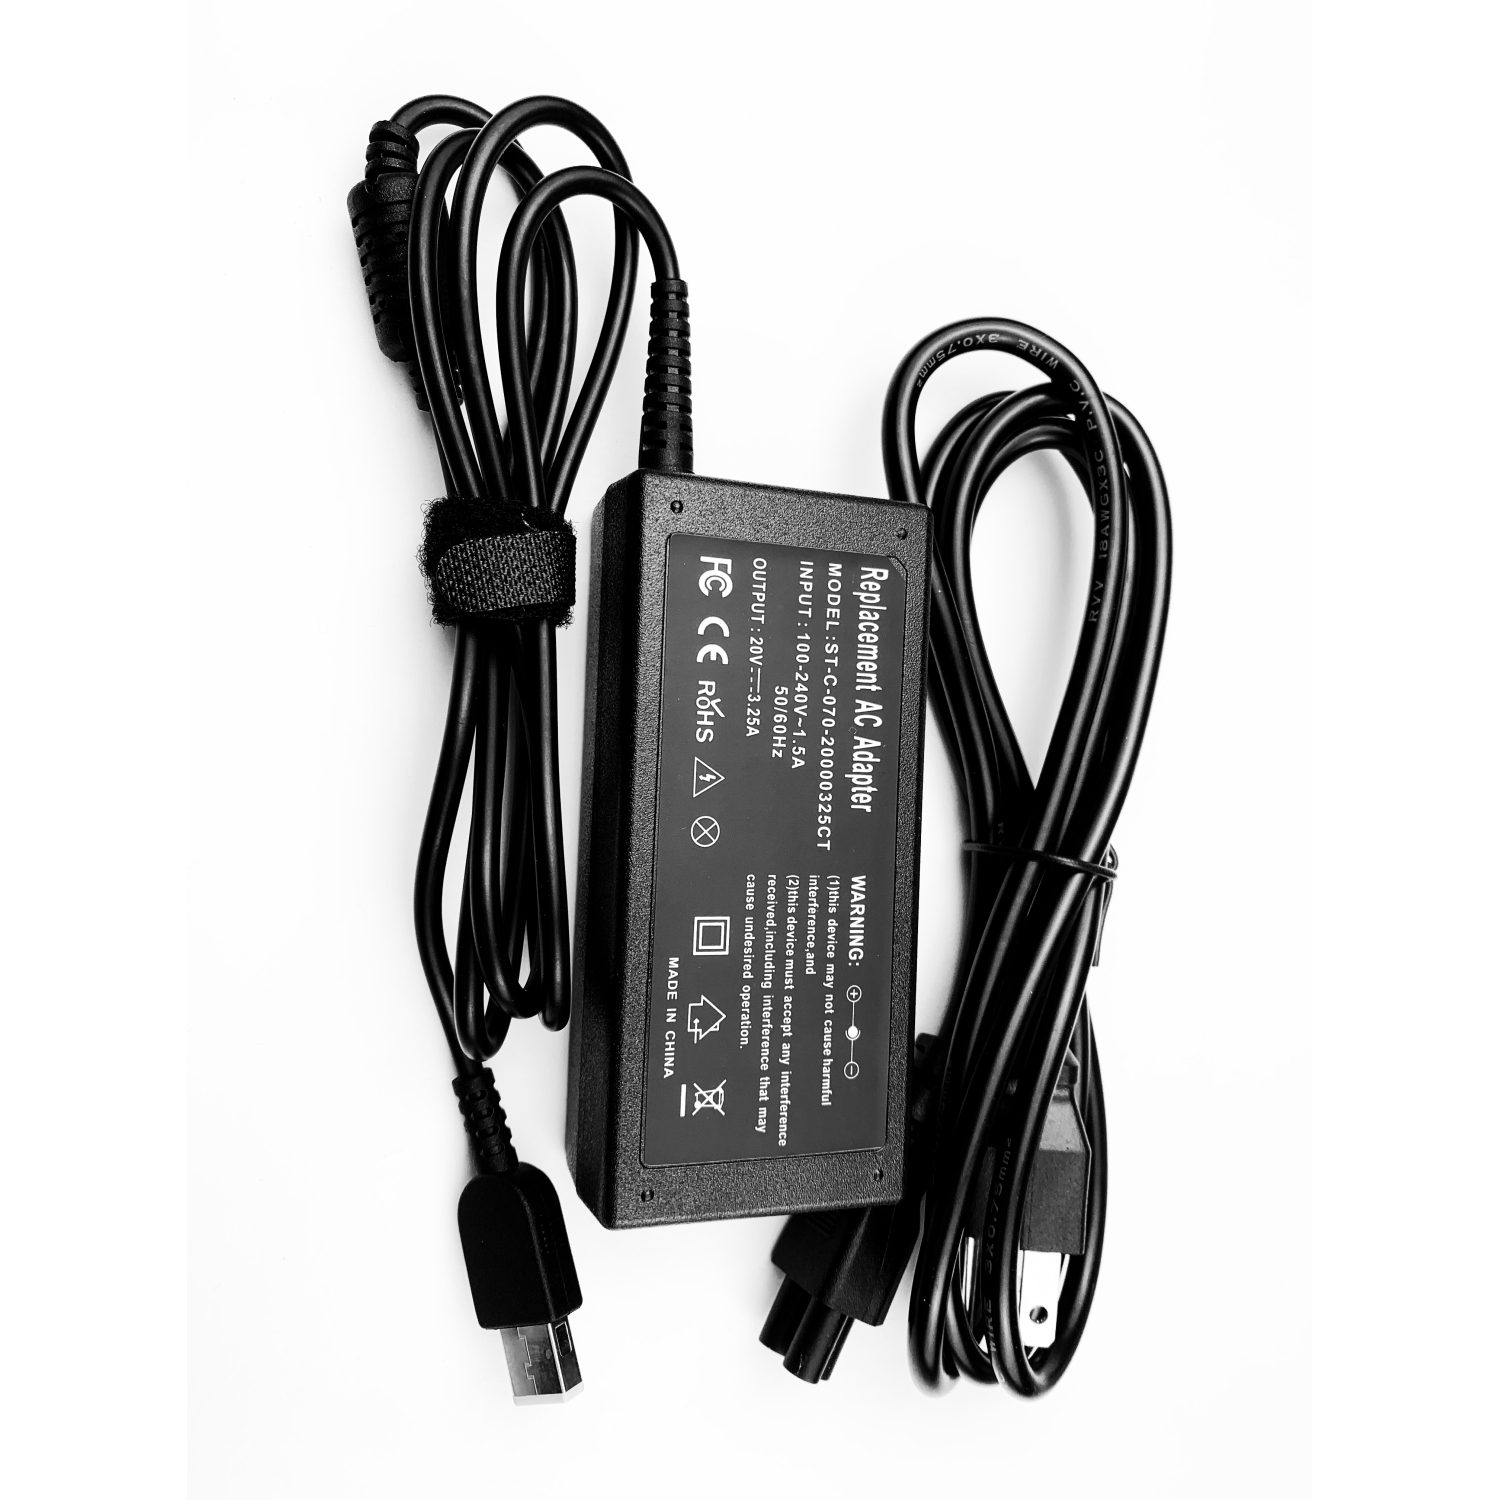 65W AC adapter charger power cord for Lenovo IdeaPad B50-80 B50-80LT